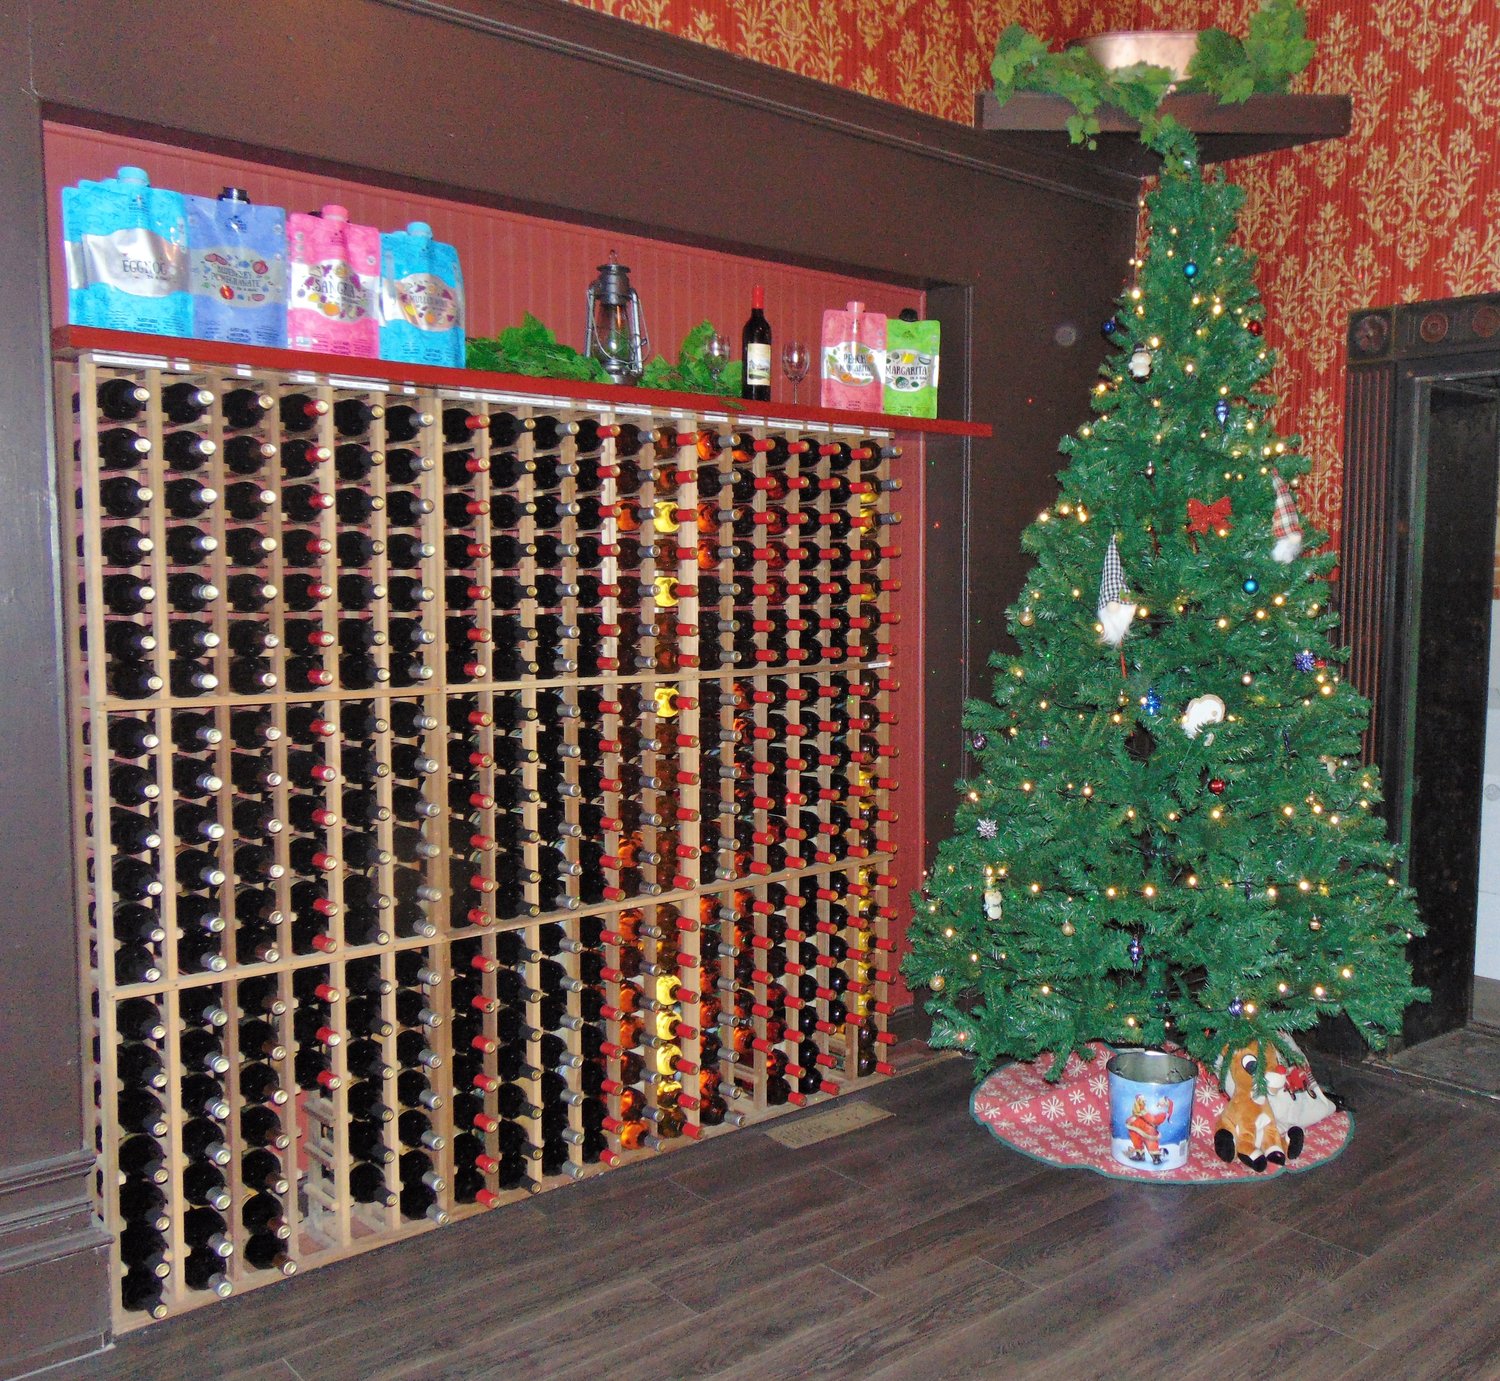 Big Creek Winery has a large selection of sweet, medium, and dry wines.